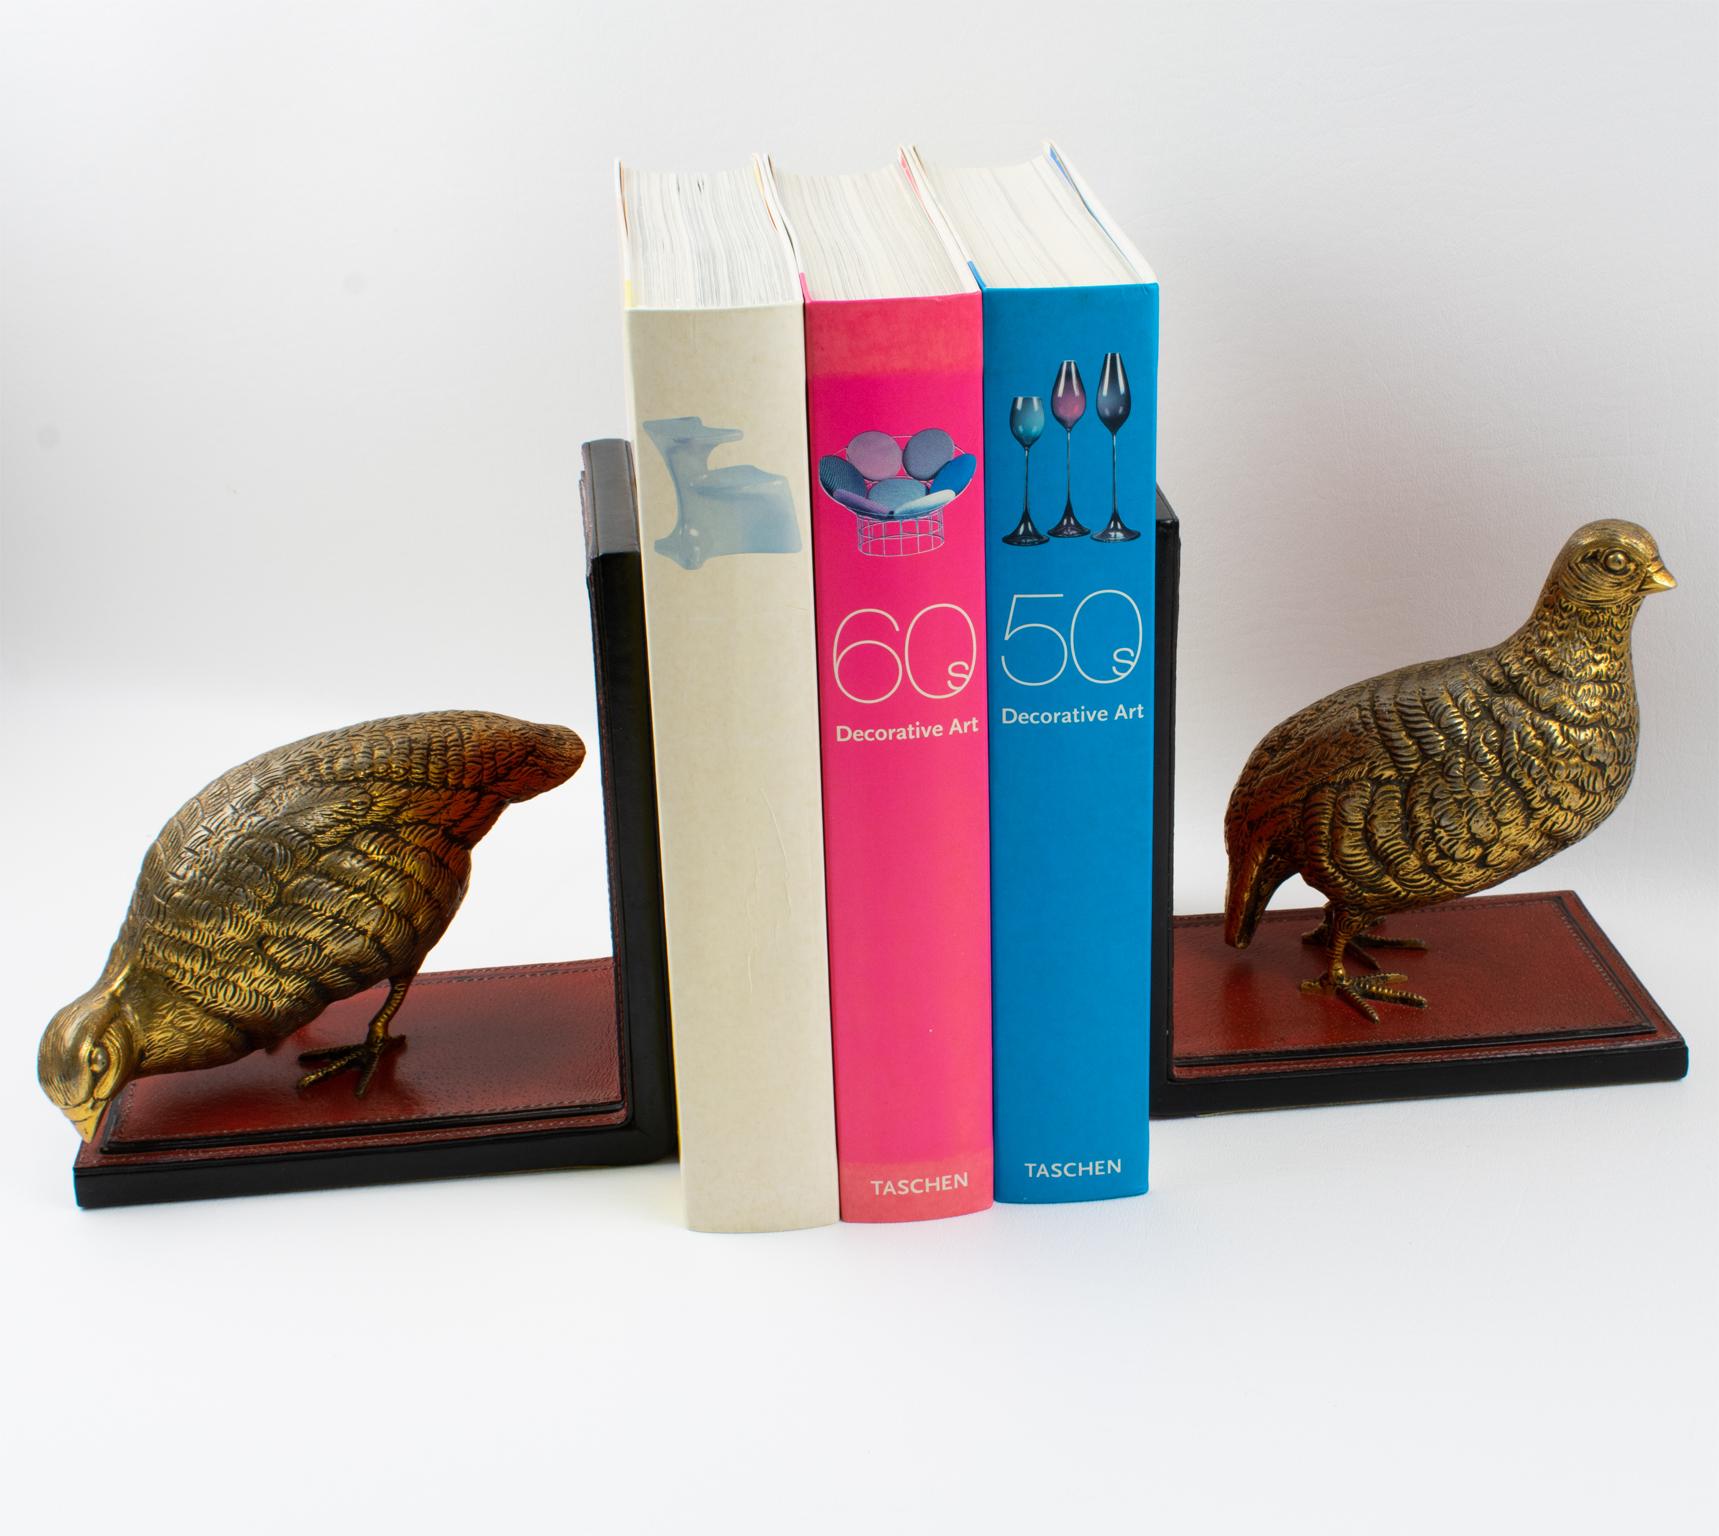 Gucci Italy Hand-Stitched Red Leather Bookends with Gilt Metal Partridges, 1970s For Sale 8